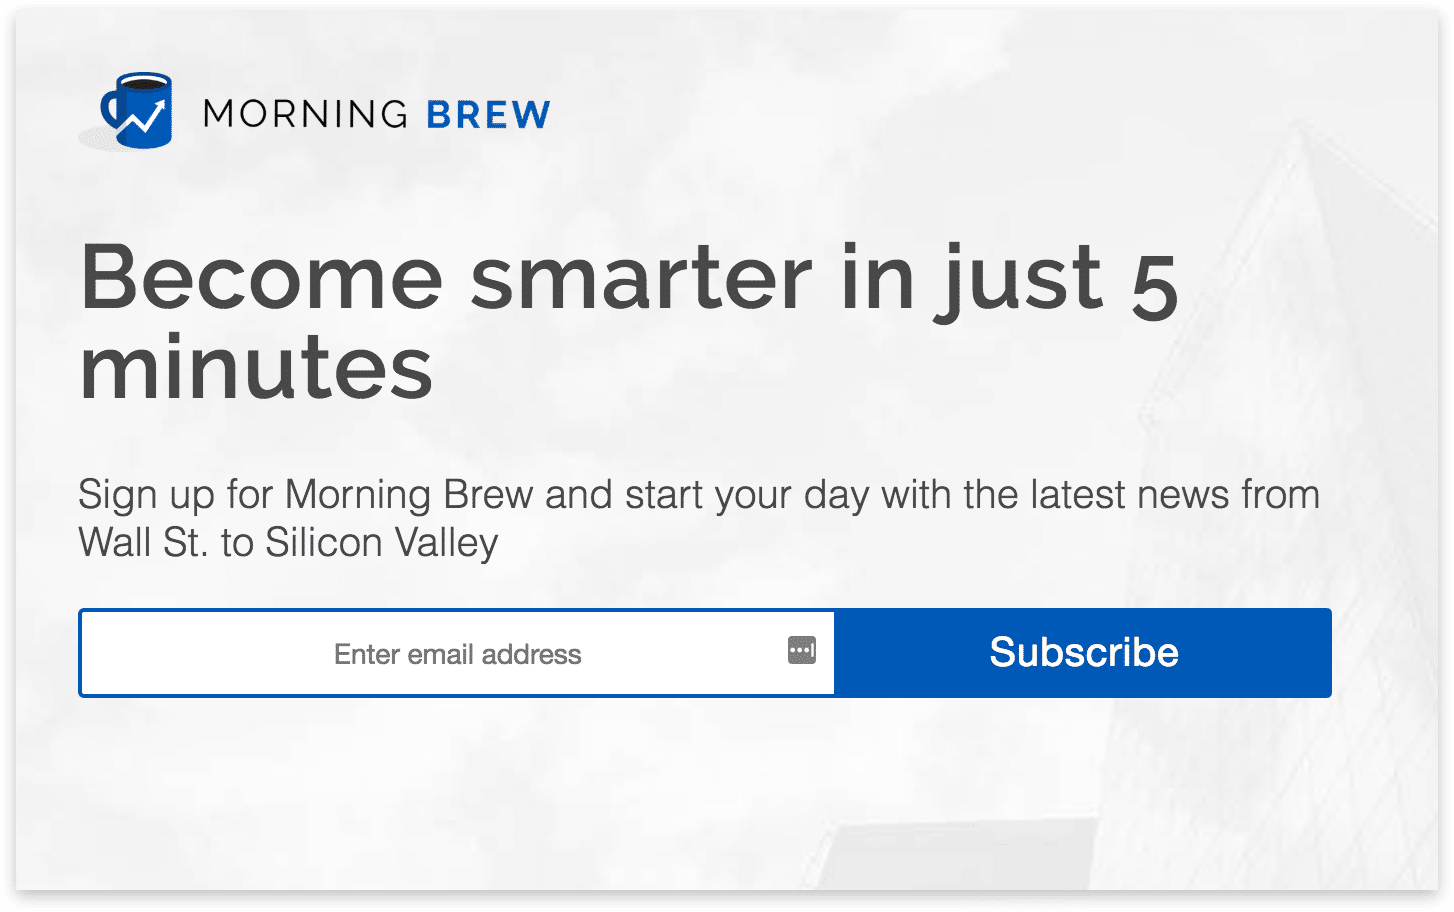 Morning Brew Email Newsletter signup form.